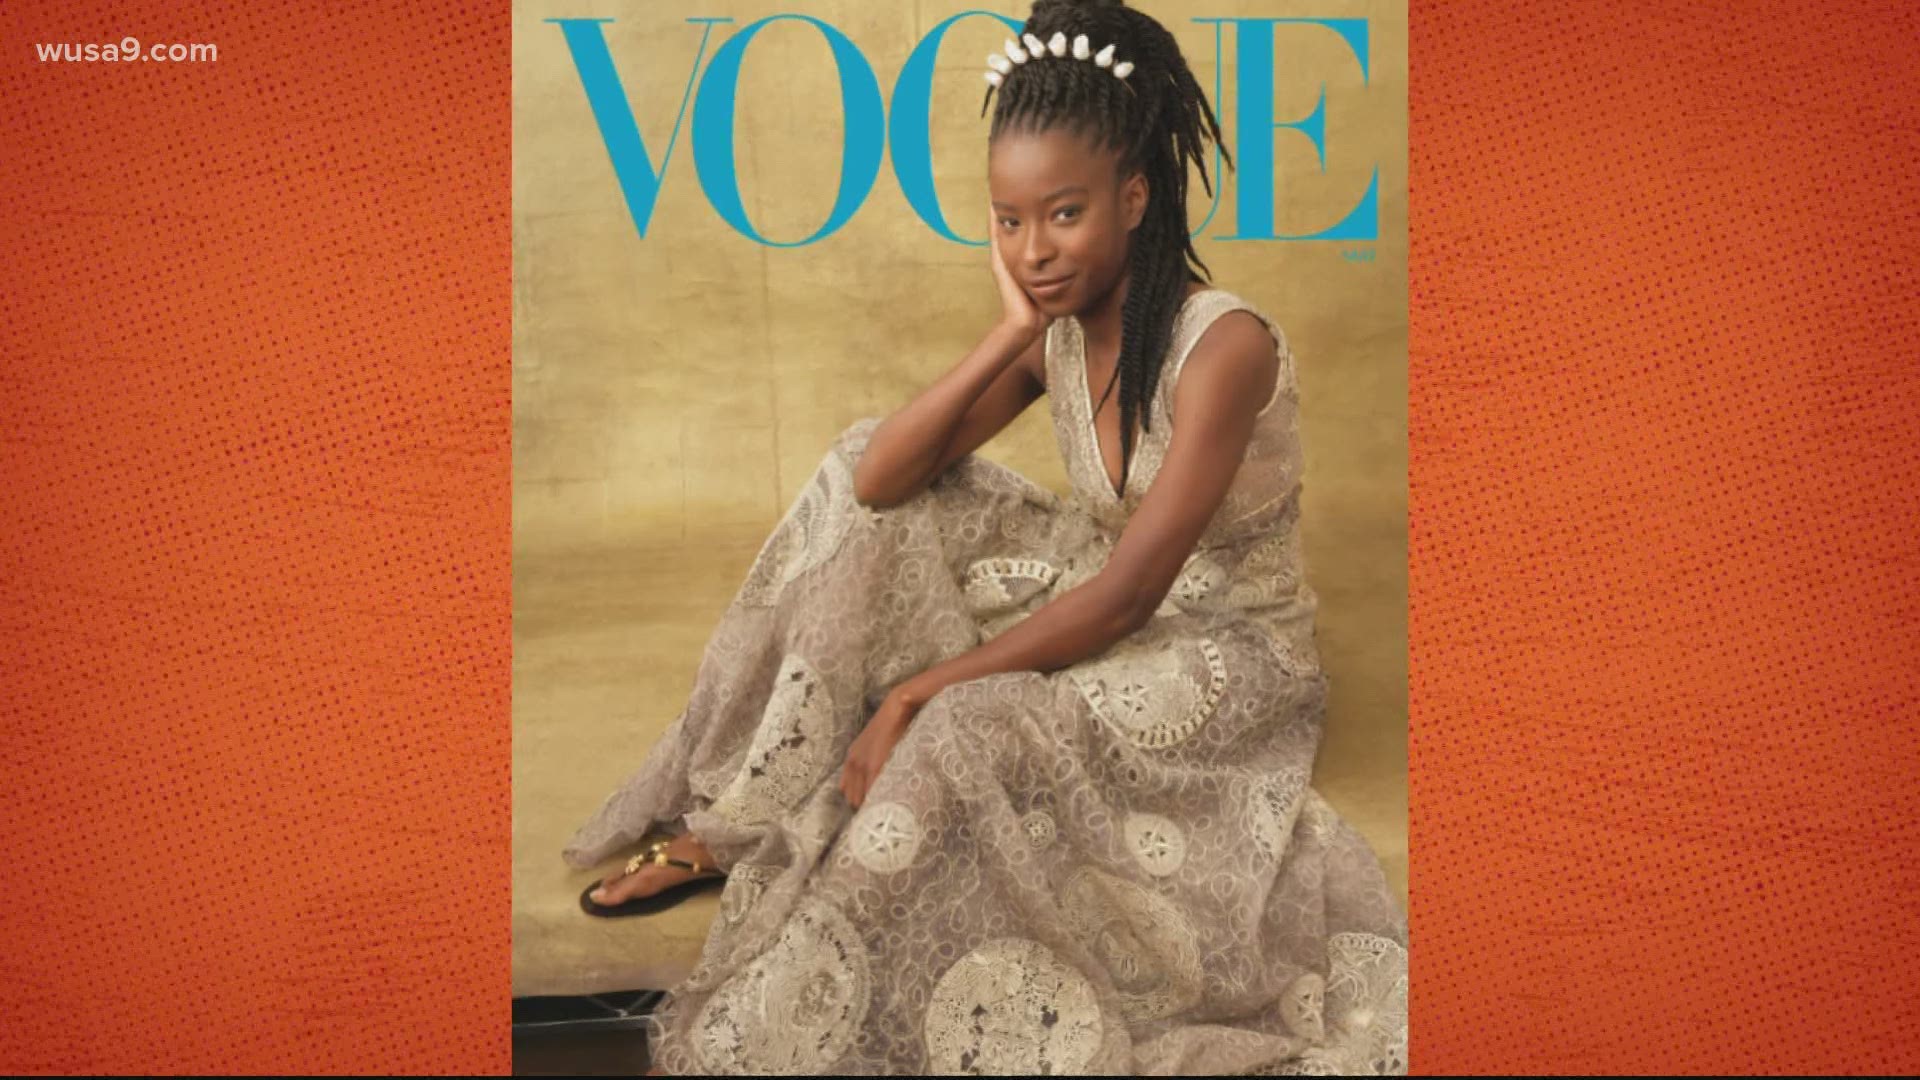 You may remember Amanda Gorman from the moving poem she recited at the Biden/Harris Inauguration. Now, she's is on the front cover of VOGUE Magazine's latest issue.